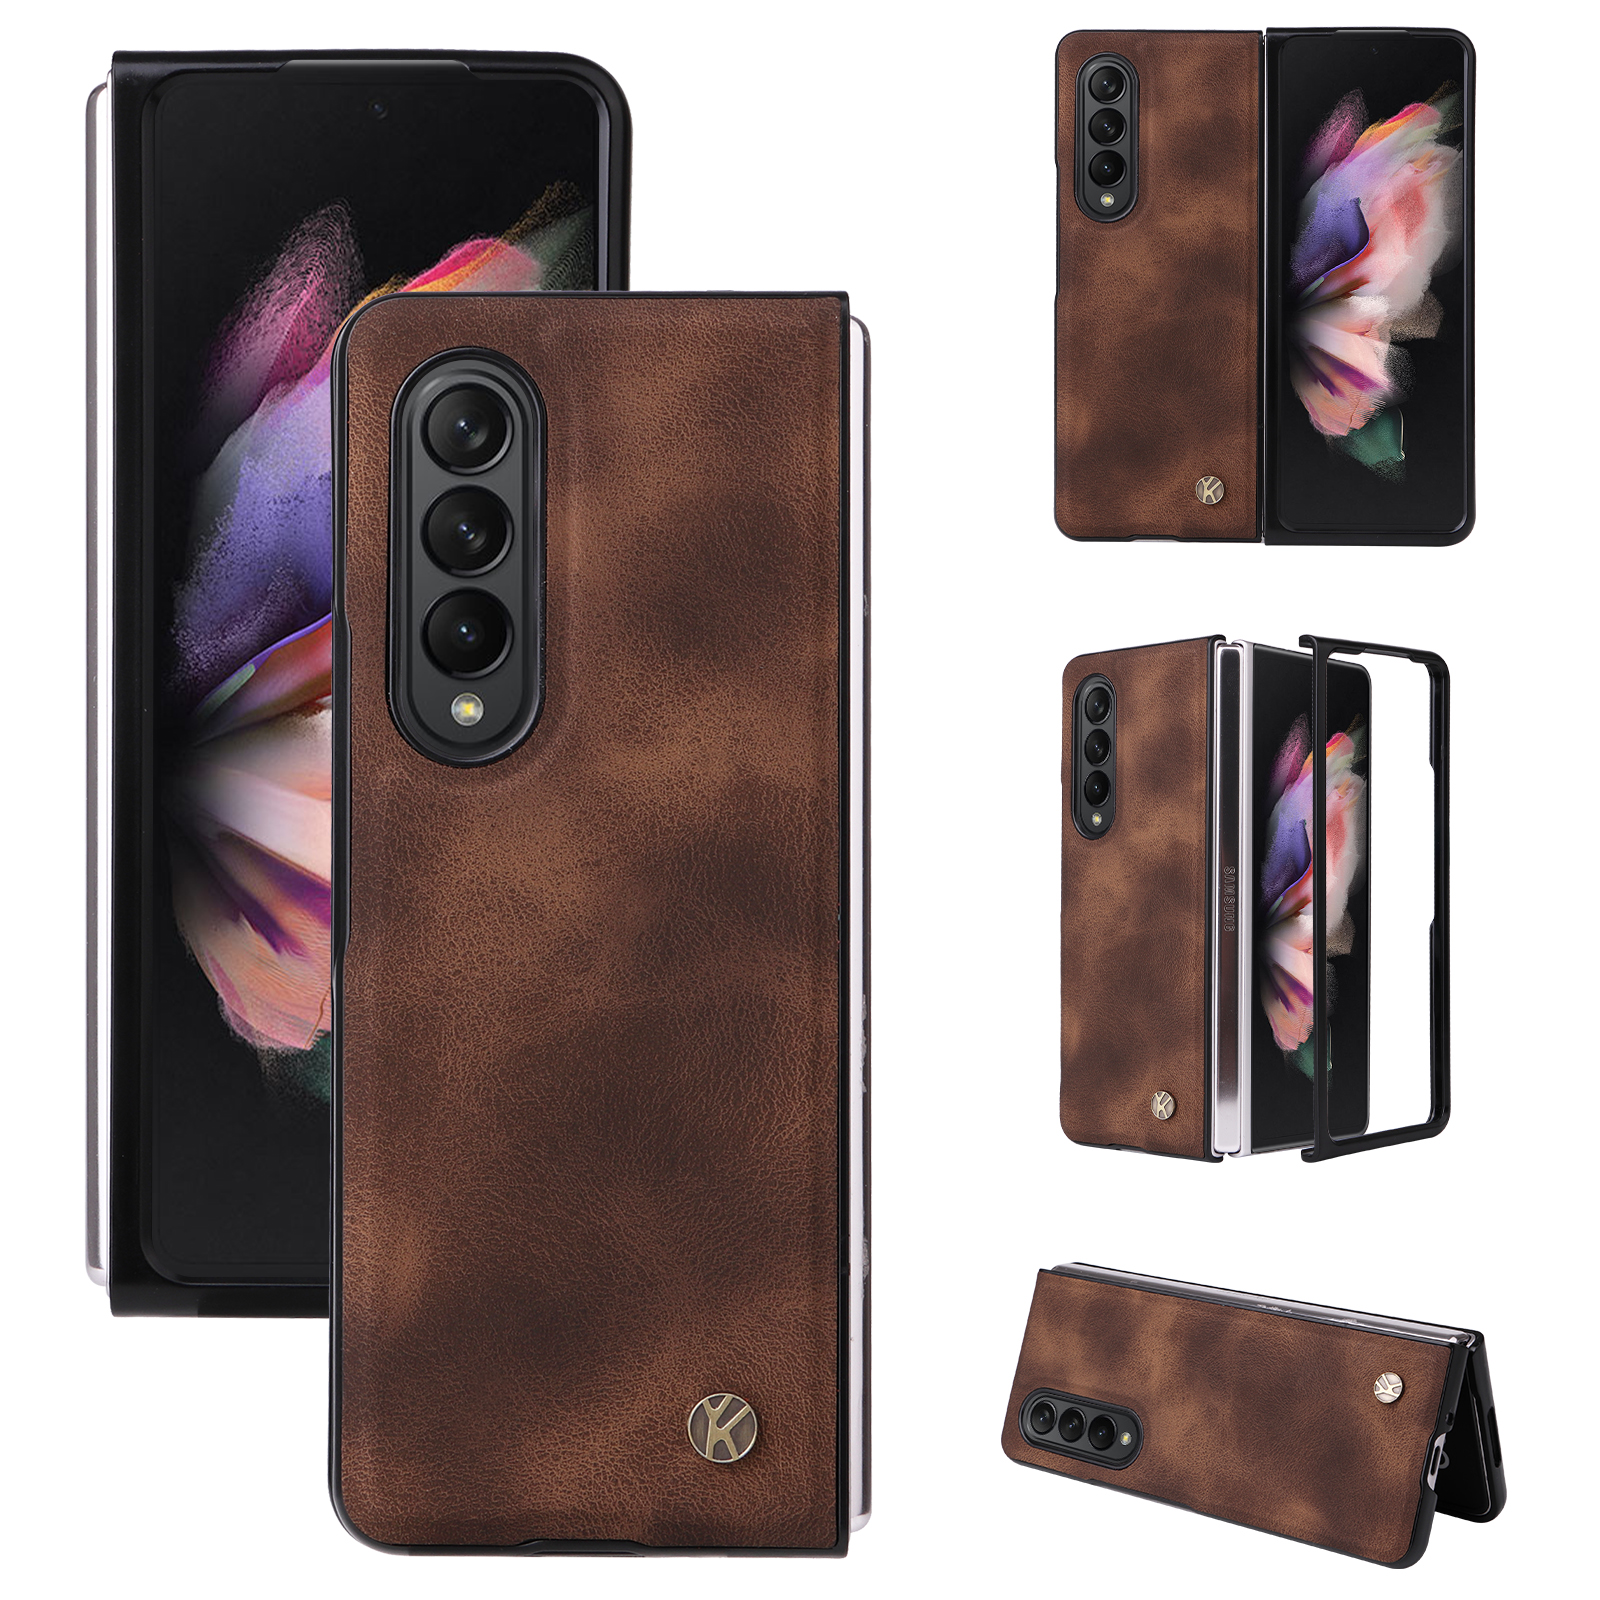 Suitable For Samsung Foldable Phones Plaid Pu Leather Fabric With